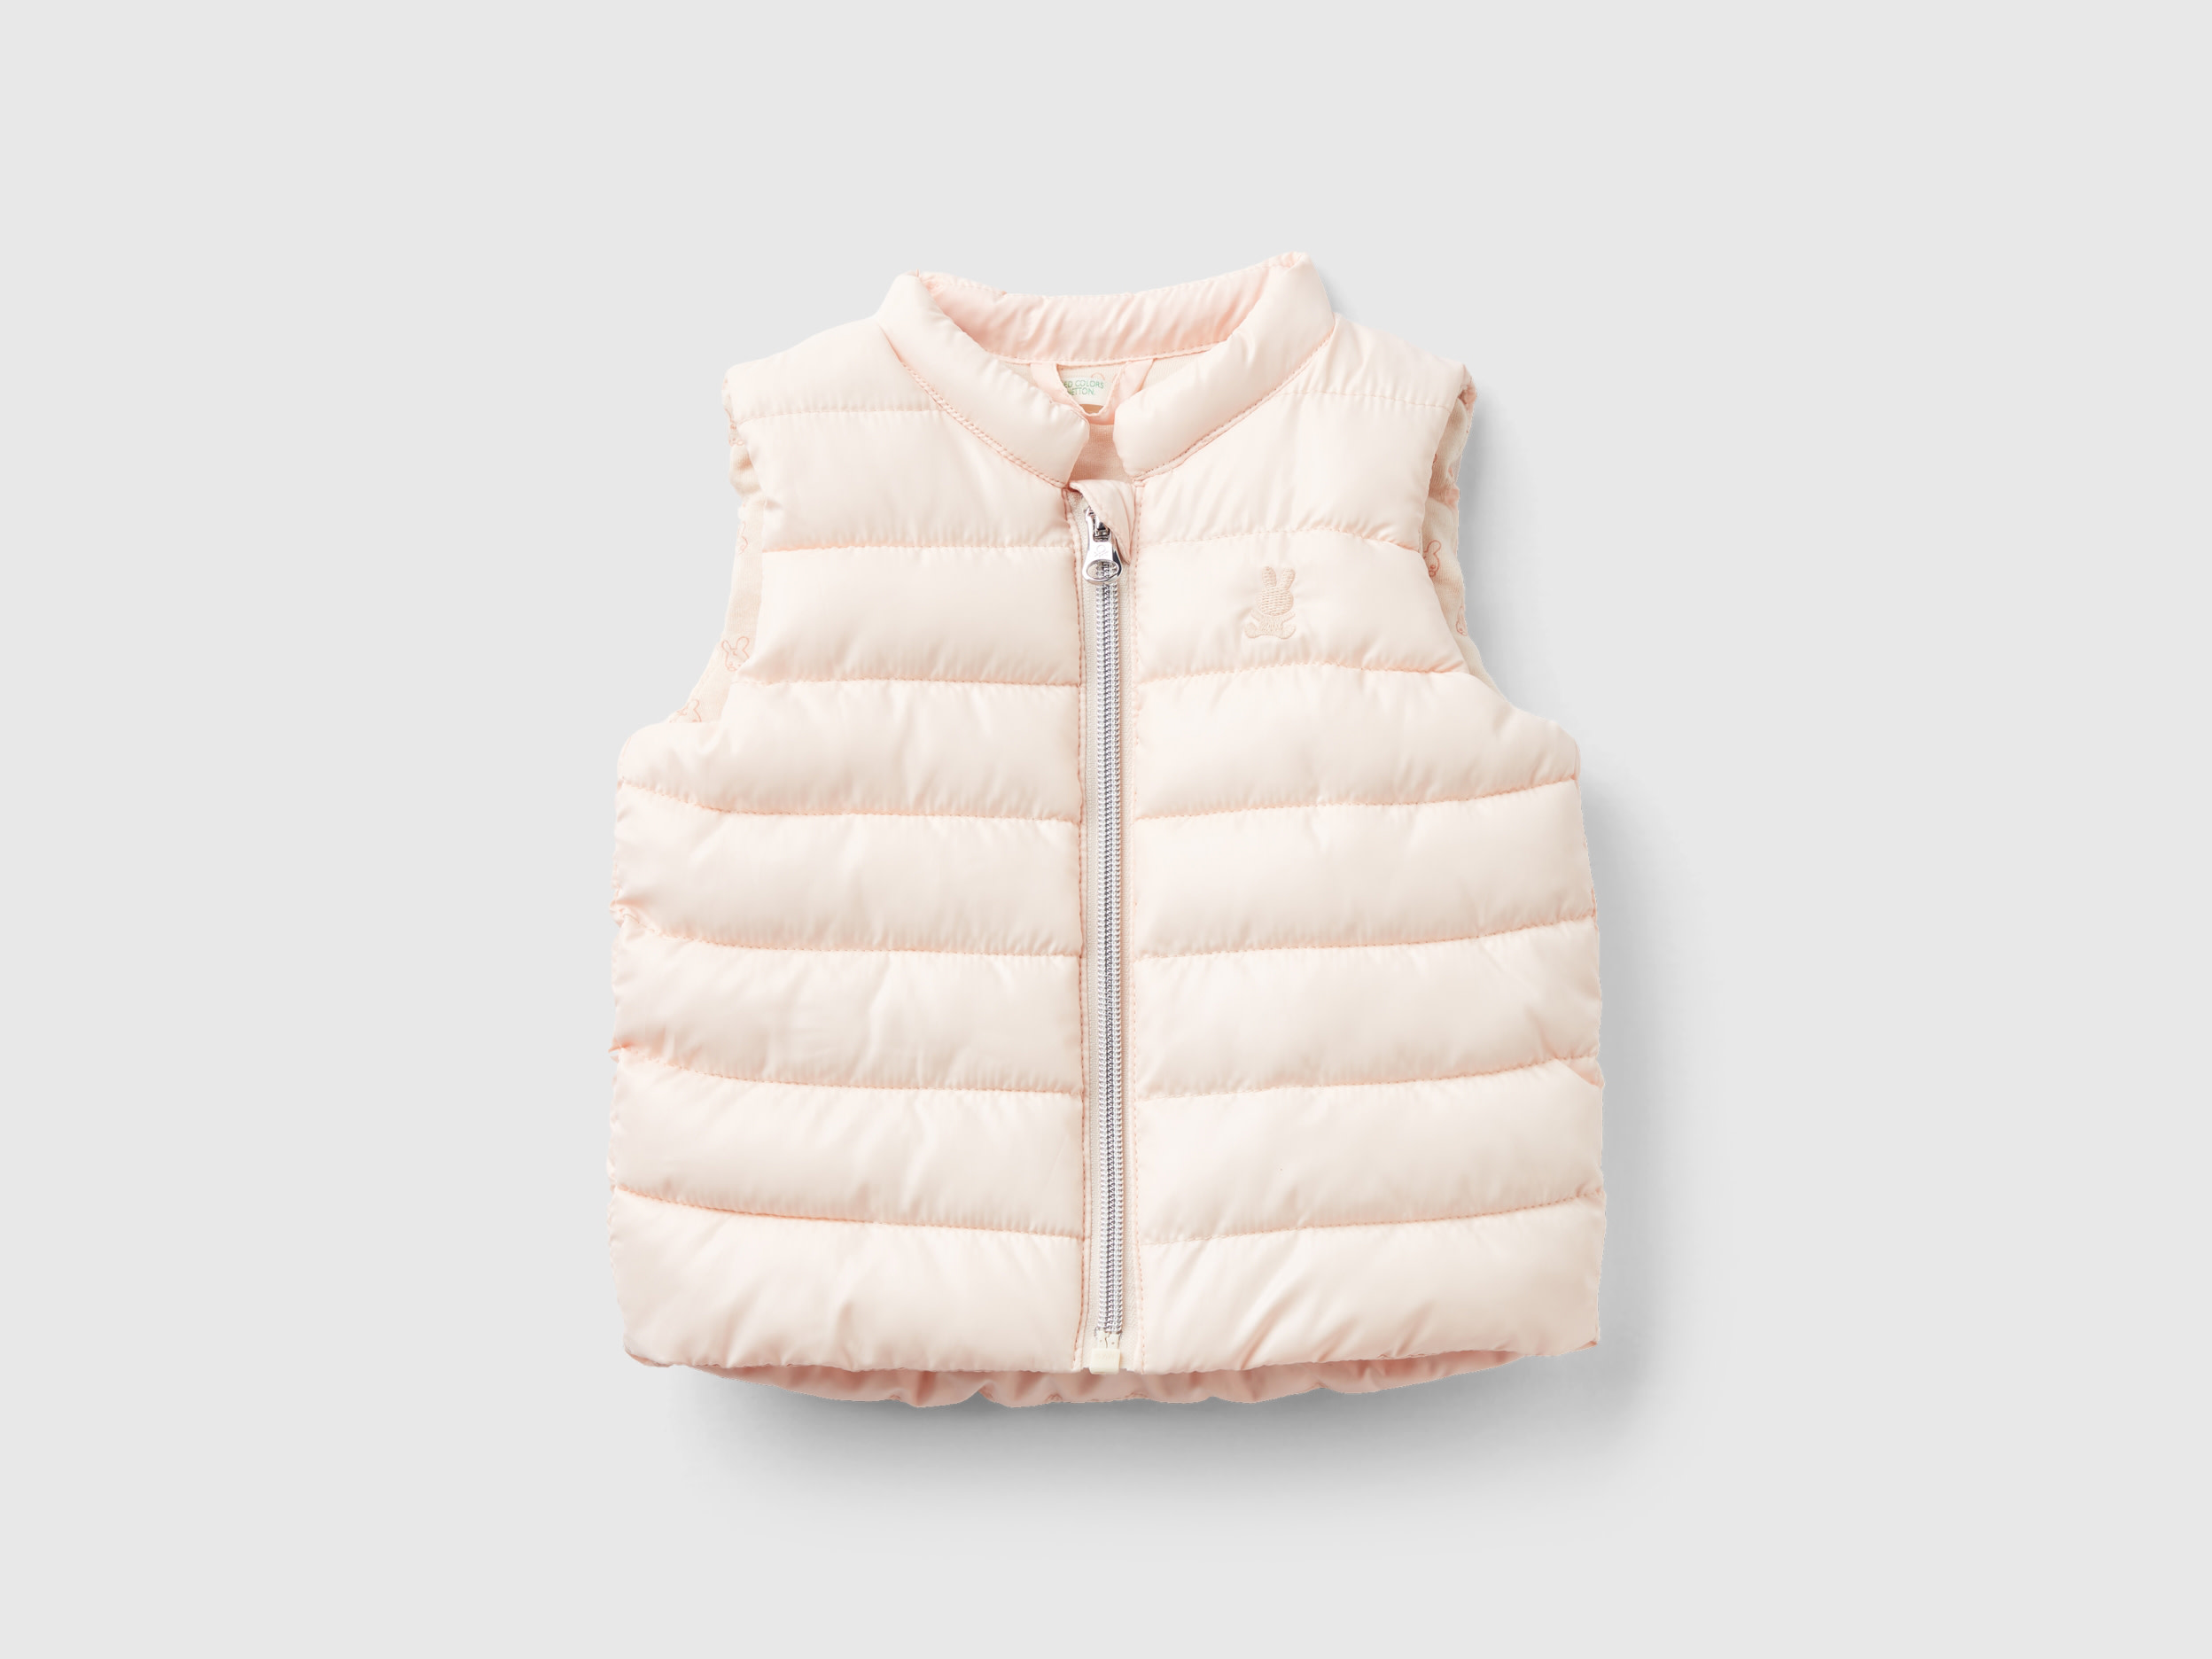 Benetton, Padded Vest In Technical Fabric, size 6-9, Peach, Kids